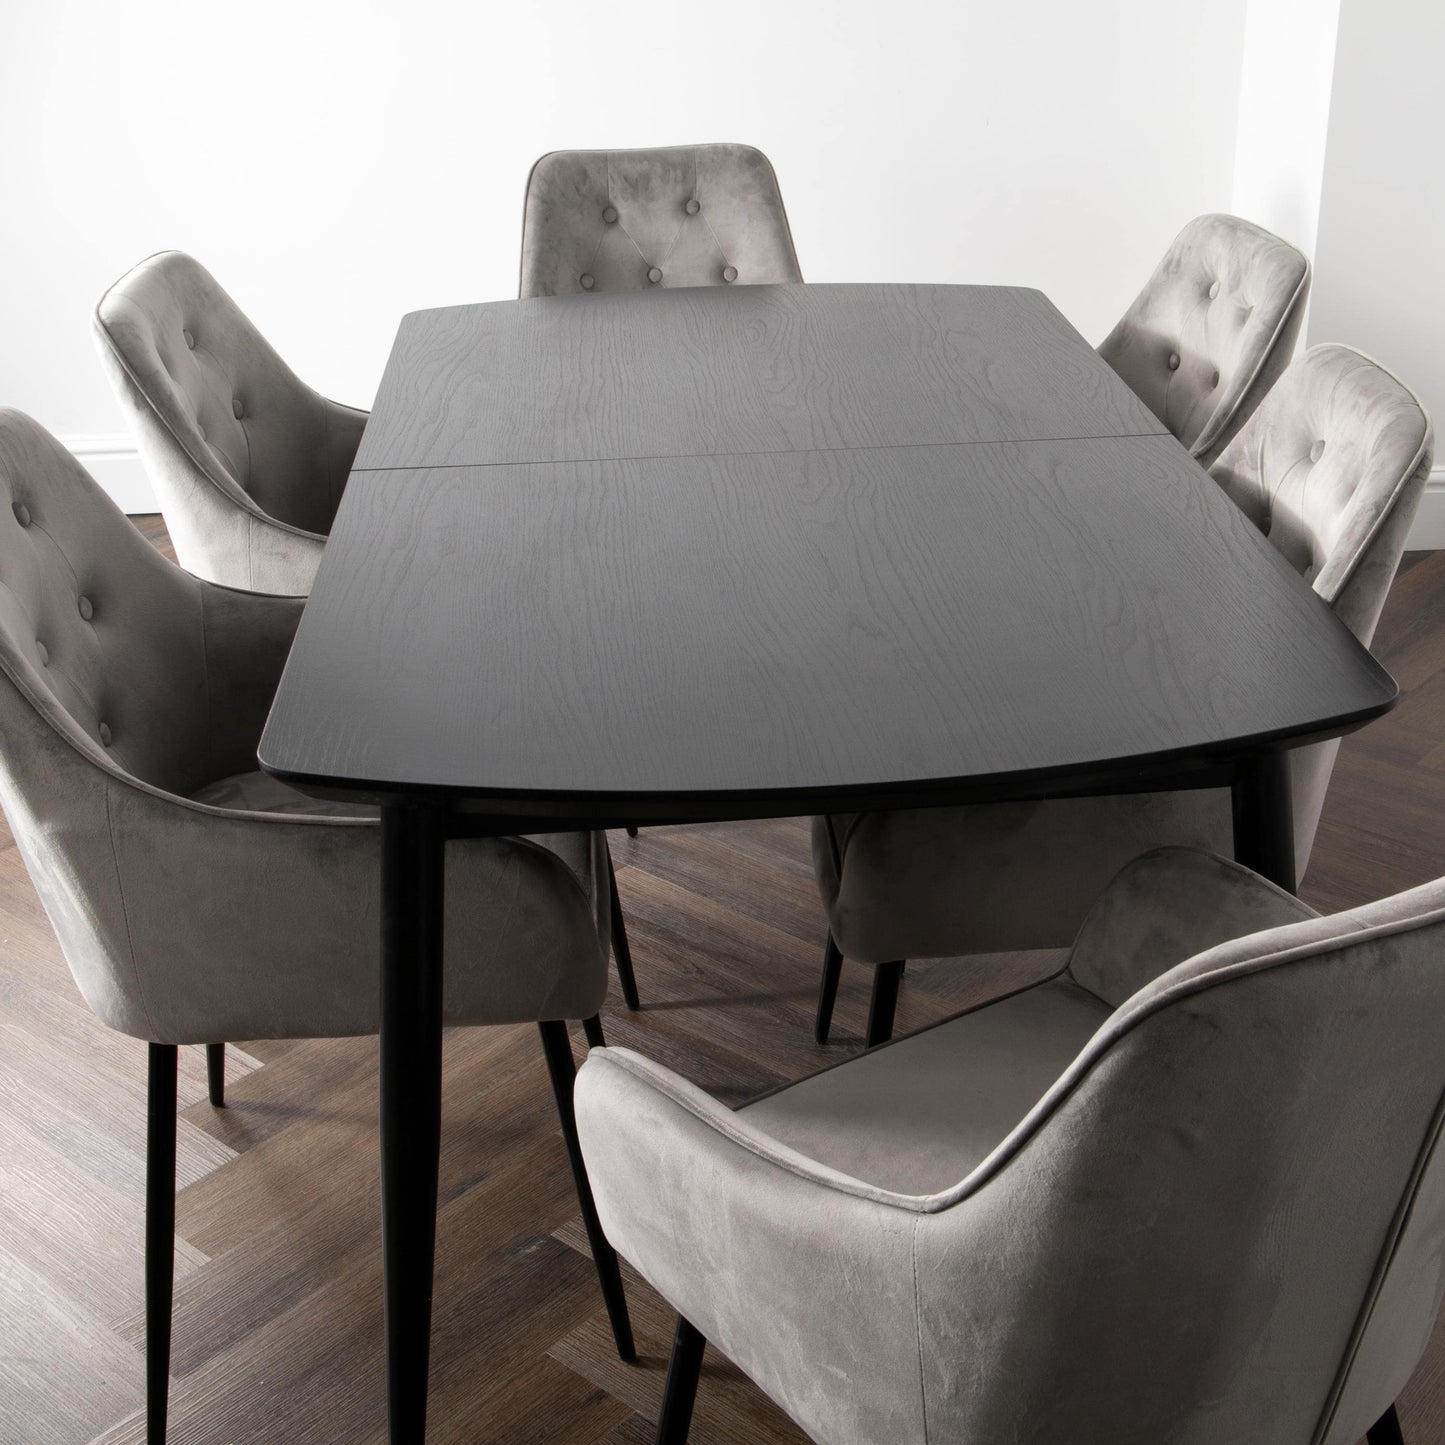 Dark Ash Oxford Dining Table and Chair Set